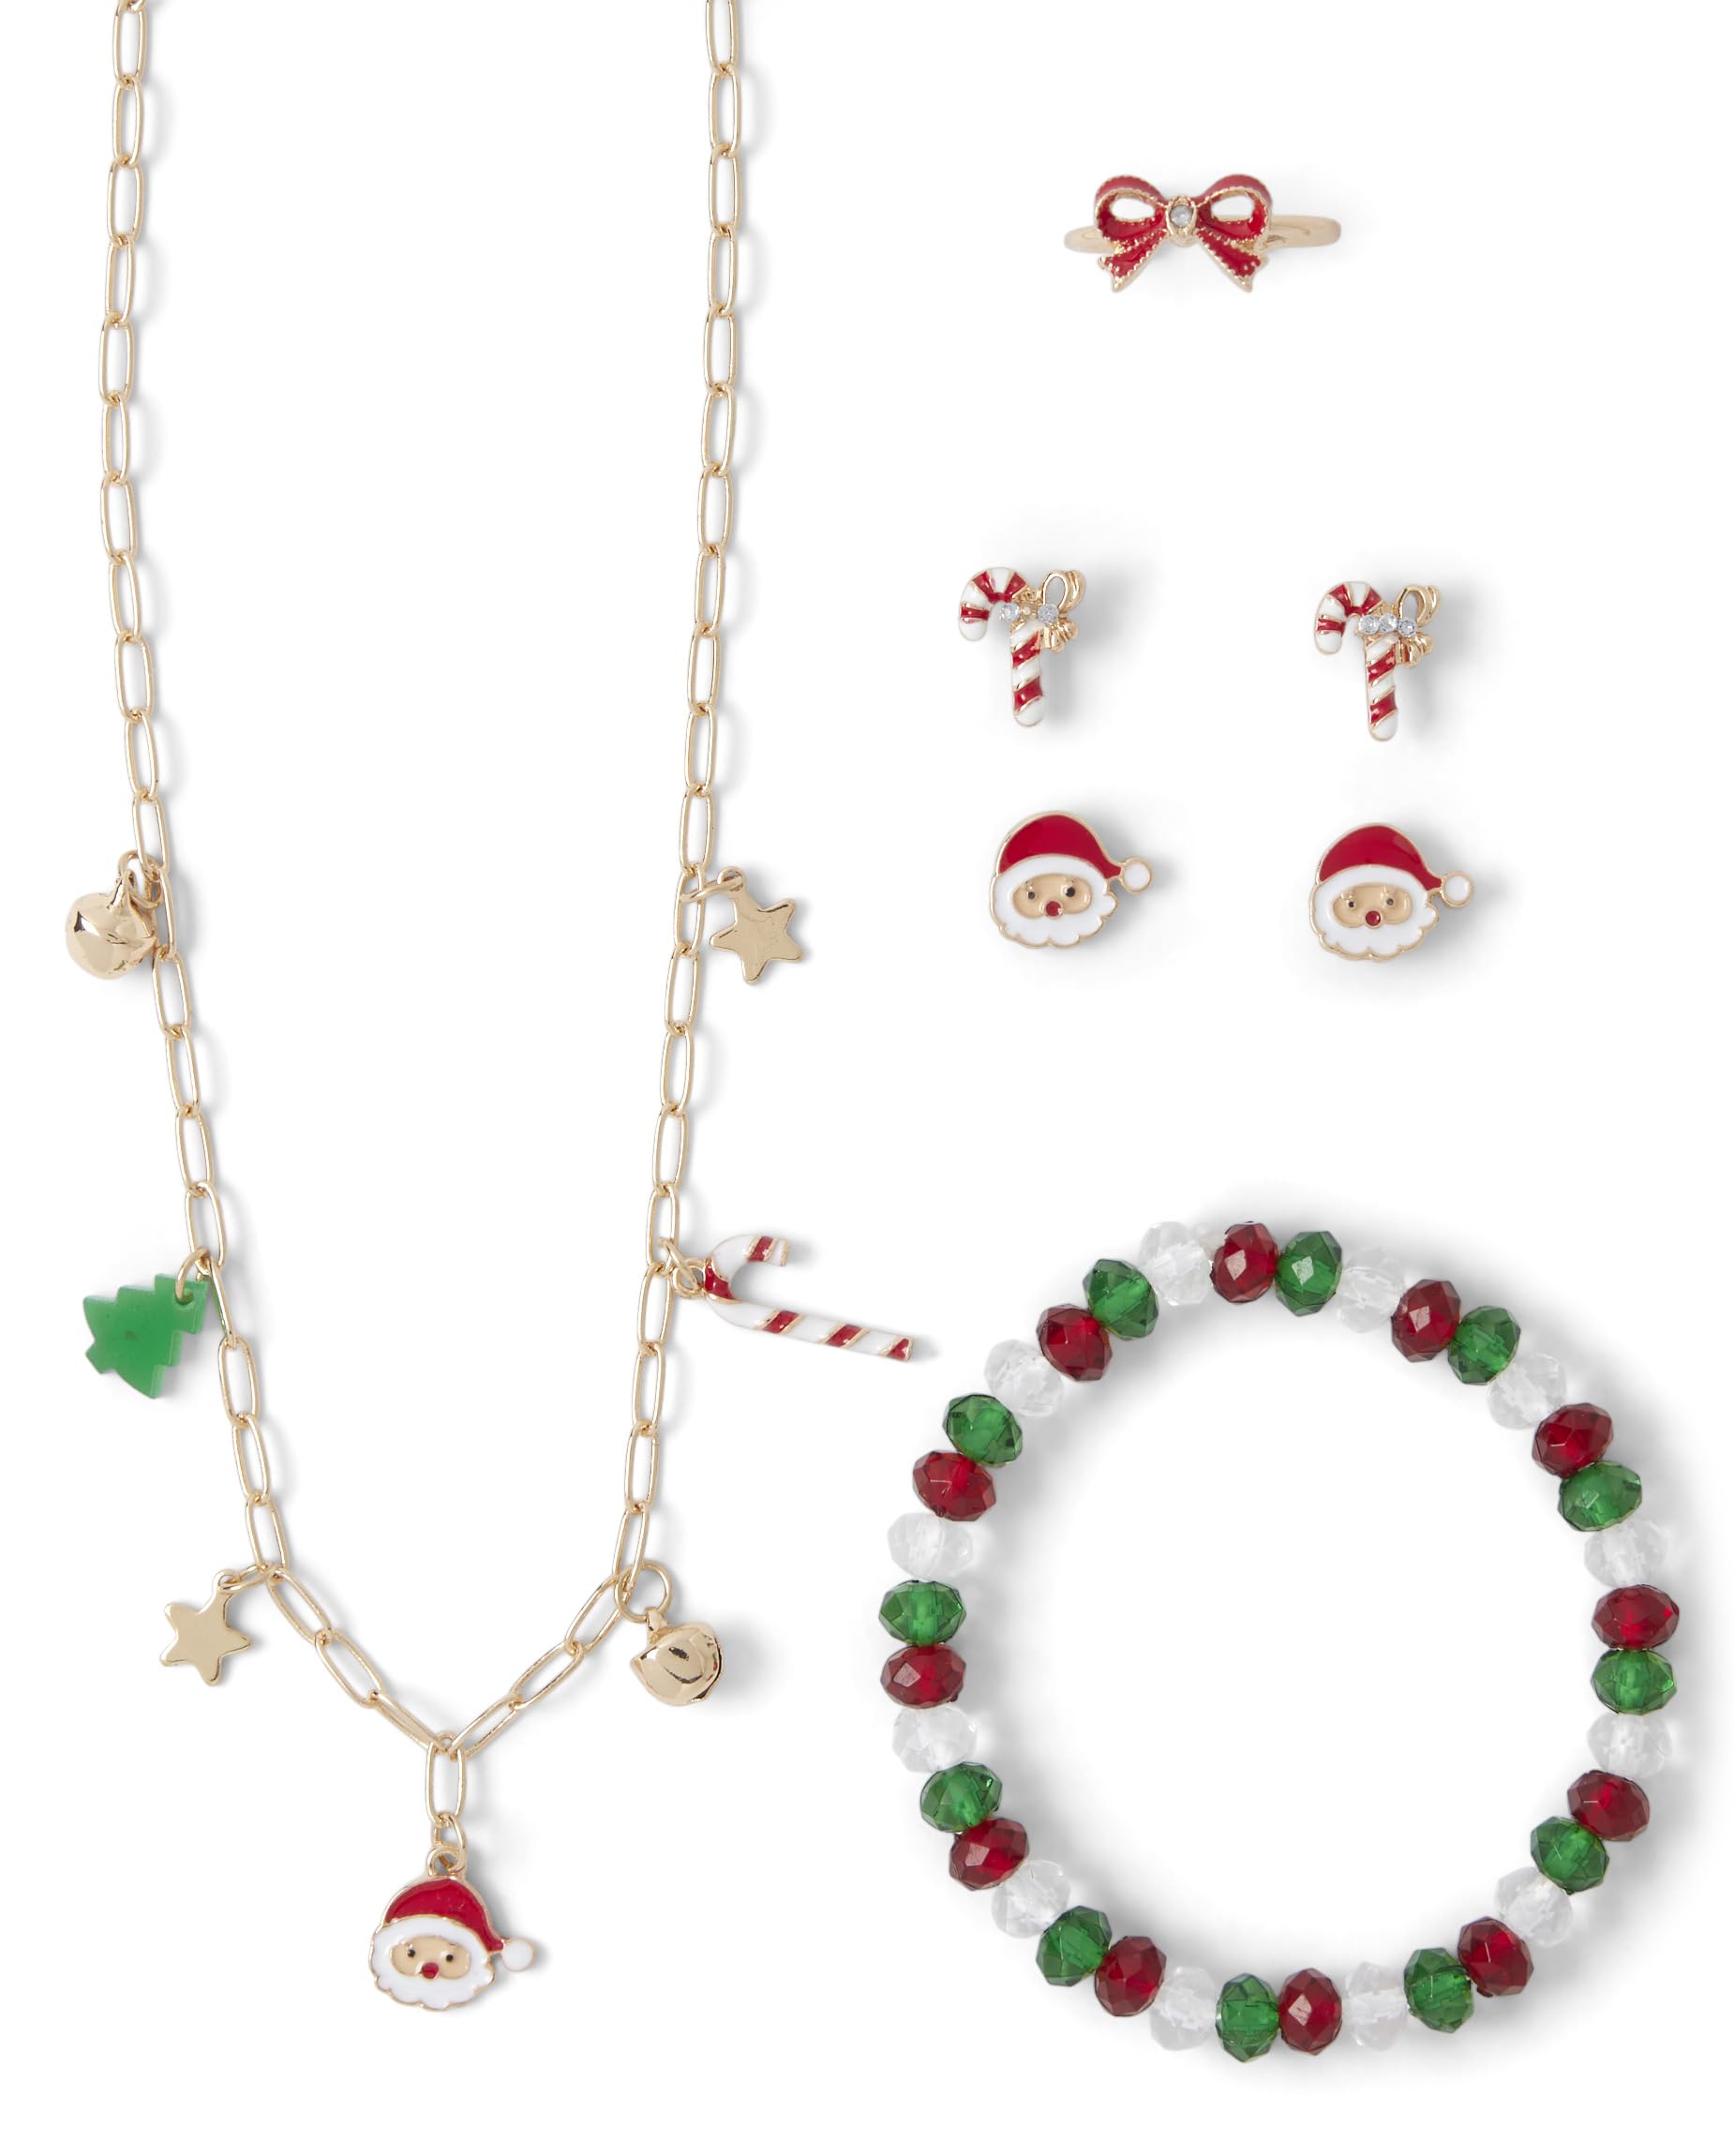 The Children's Place Girls' 5-Piece Jewelry Gift Set, Christmas Necklace, Bracelet, Ring and Earrings, Multi Color, NO Size